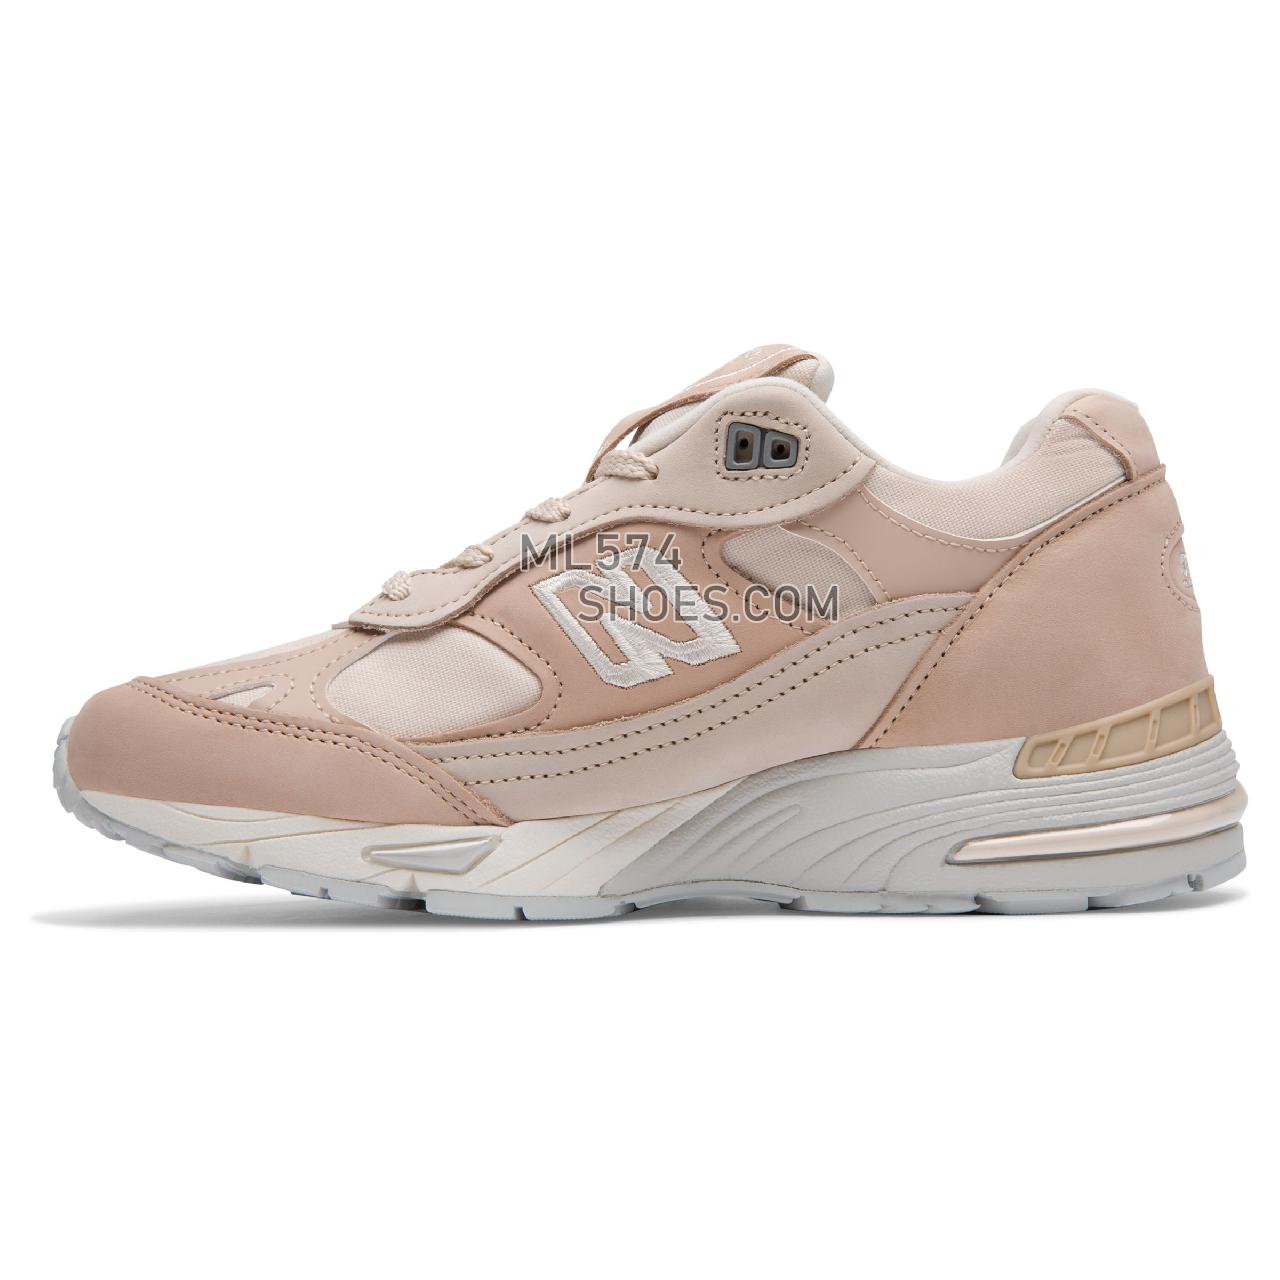 New Balance Made in UK 991 Nubuck - Men's Made in UK 991 Nubuck - Sand with Grey - W991SSG